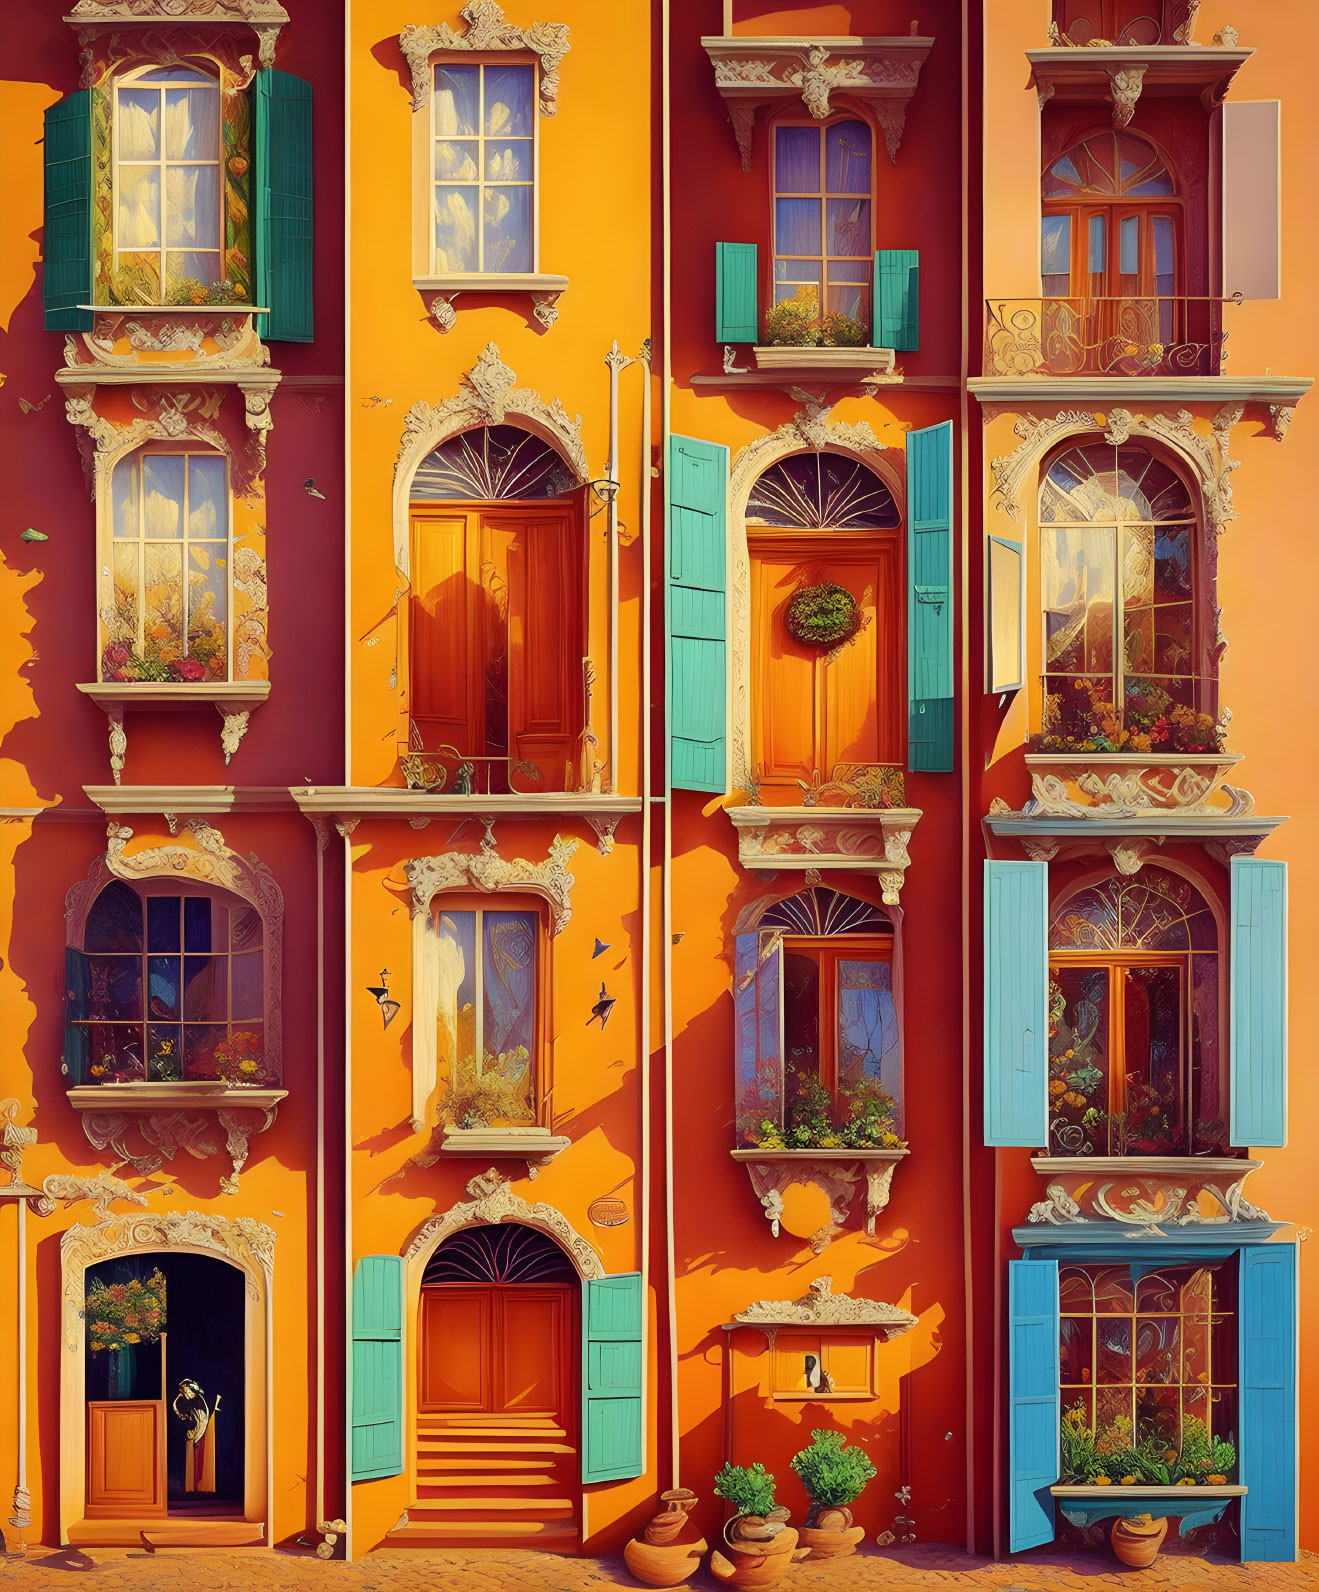 Colorful Collage of Ornate Orange and Yellow Windows and Doors